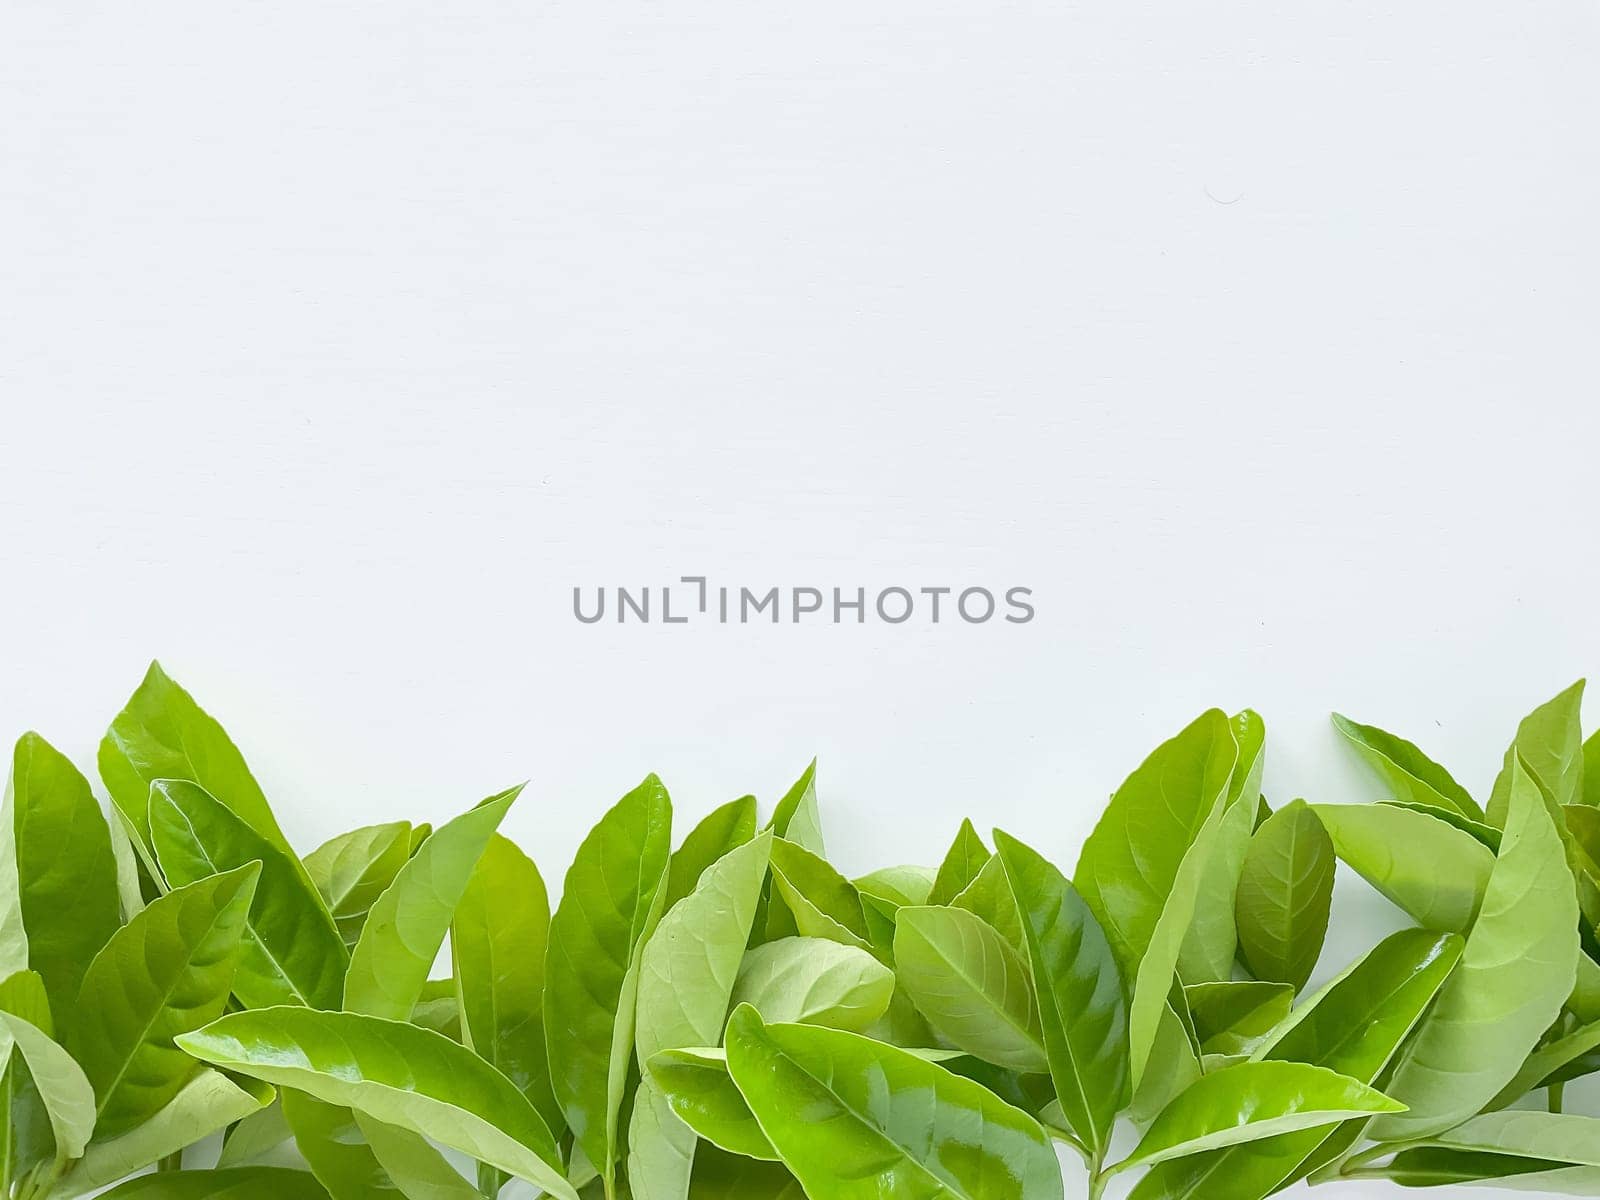 Green leaves at the bottom with empty space for text or inscription. concept by Lunnica